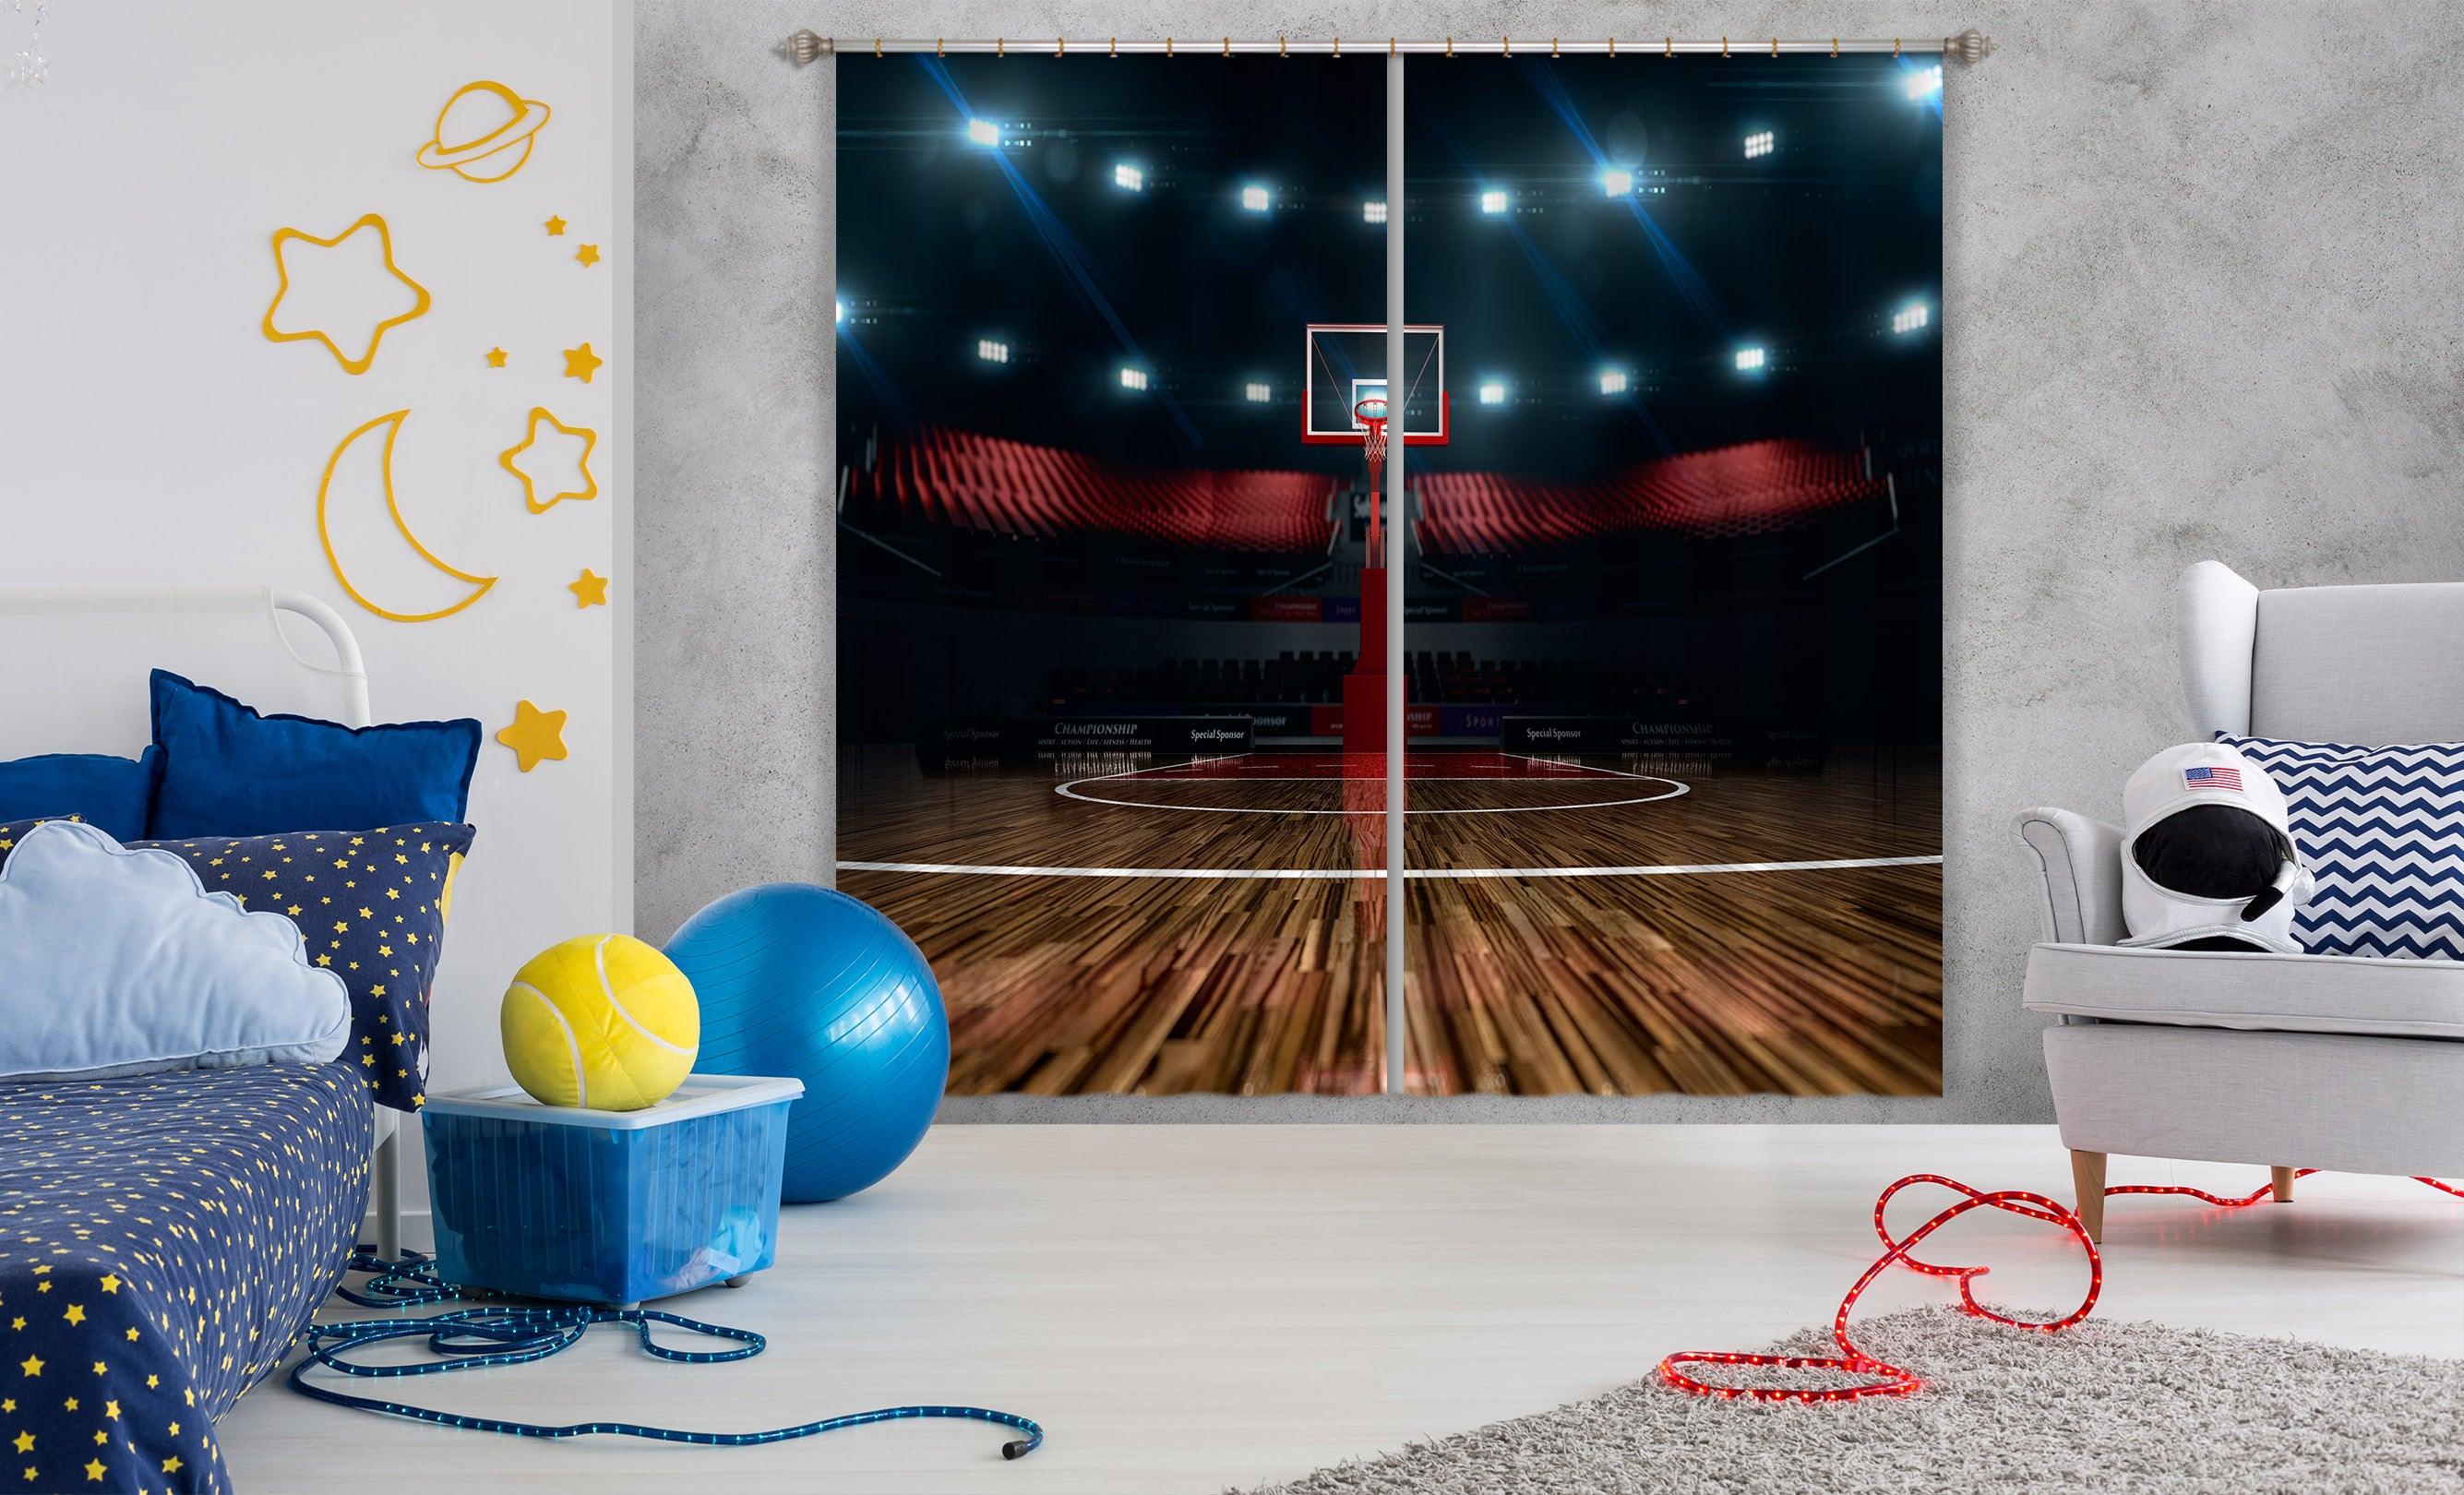 3D Basketball Gym Curtains and Drapes A18- Jess Art Decoration